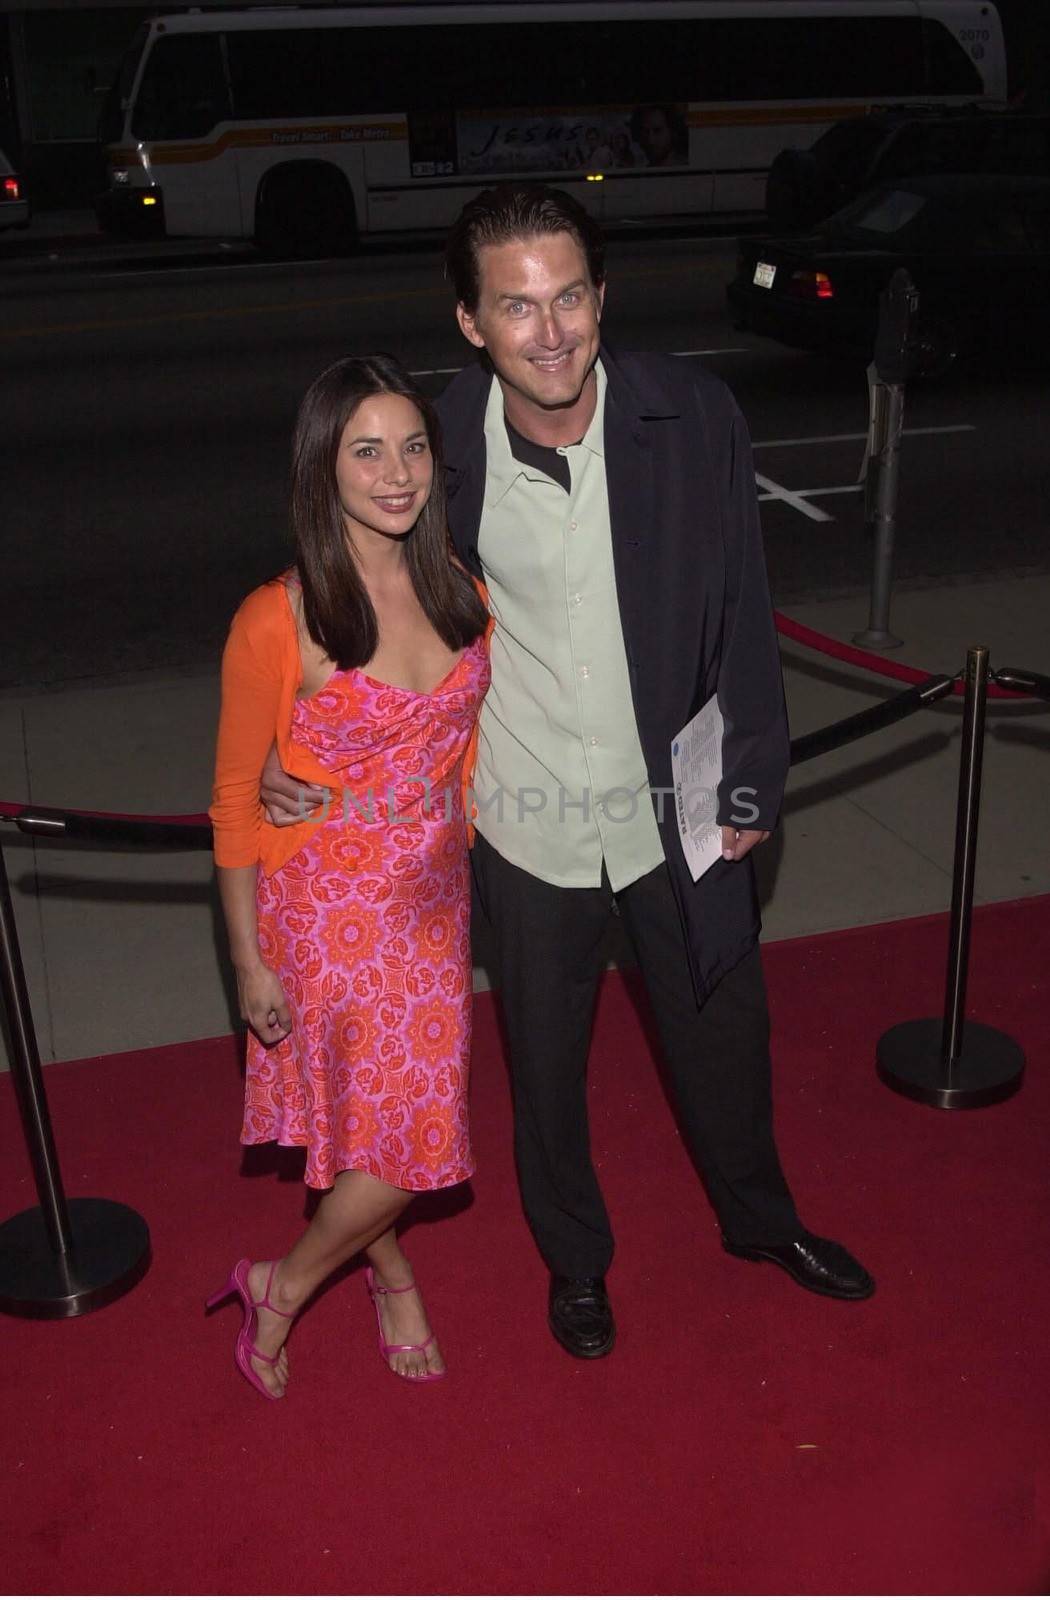 Geoffrey Blake and wife Marsha at the premiere of Showtime's "RATED X" in Hollywood, 04-27-00